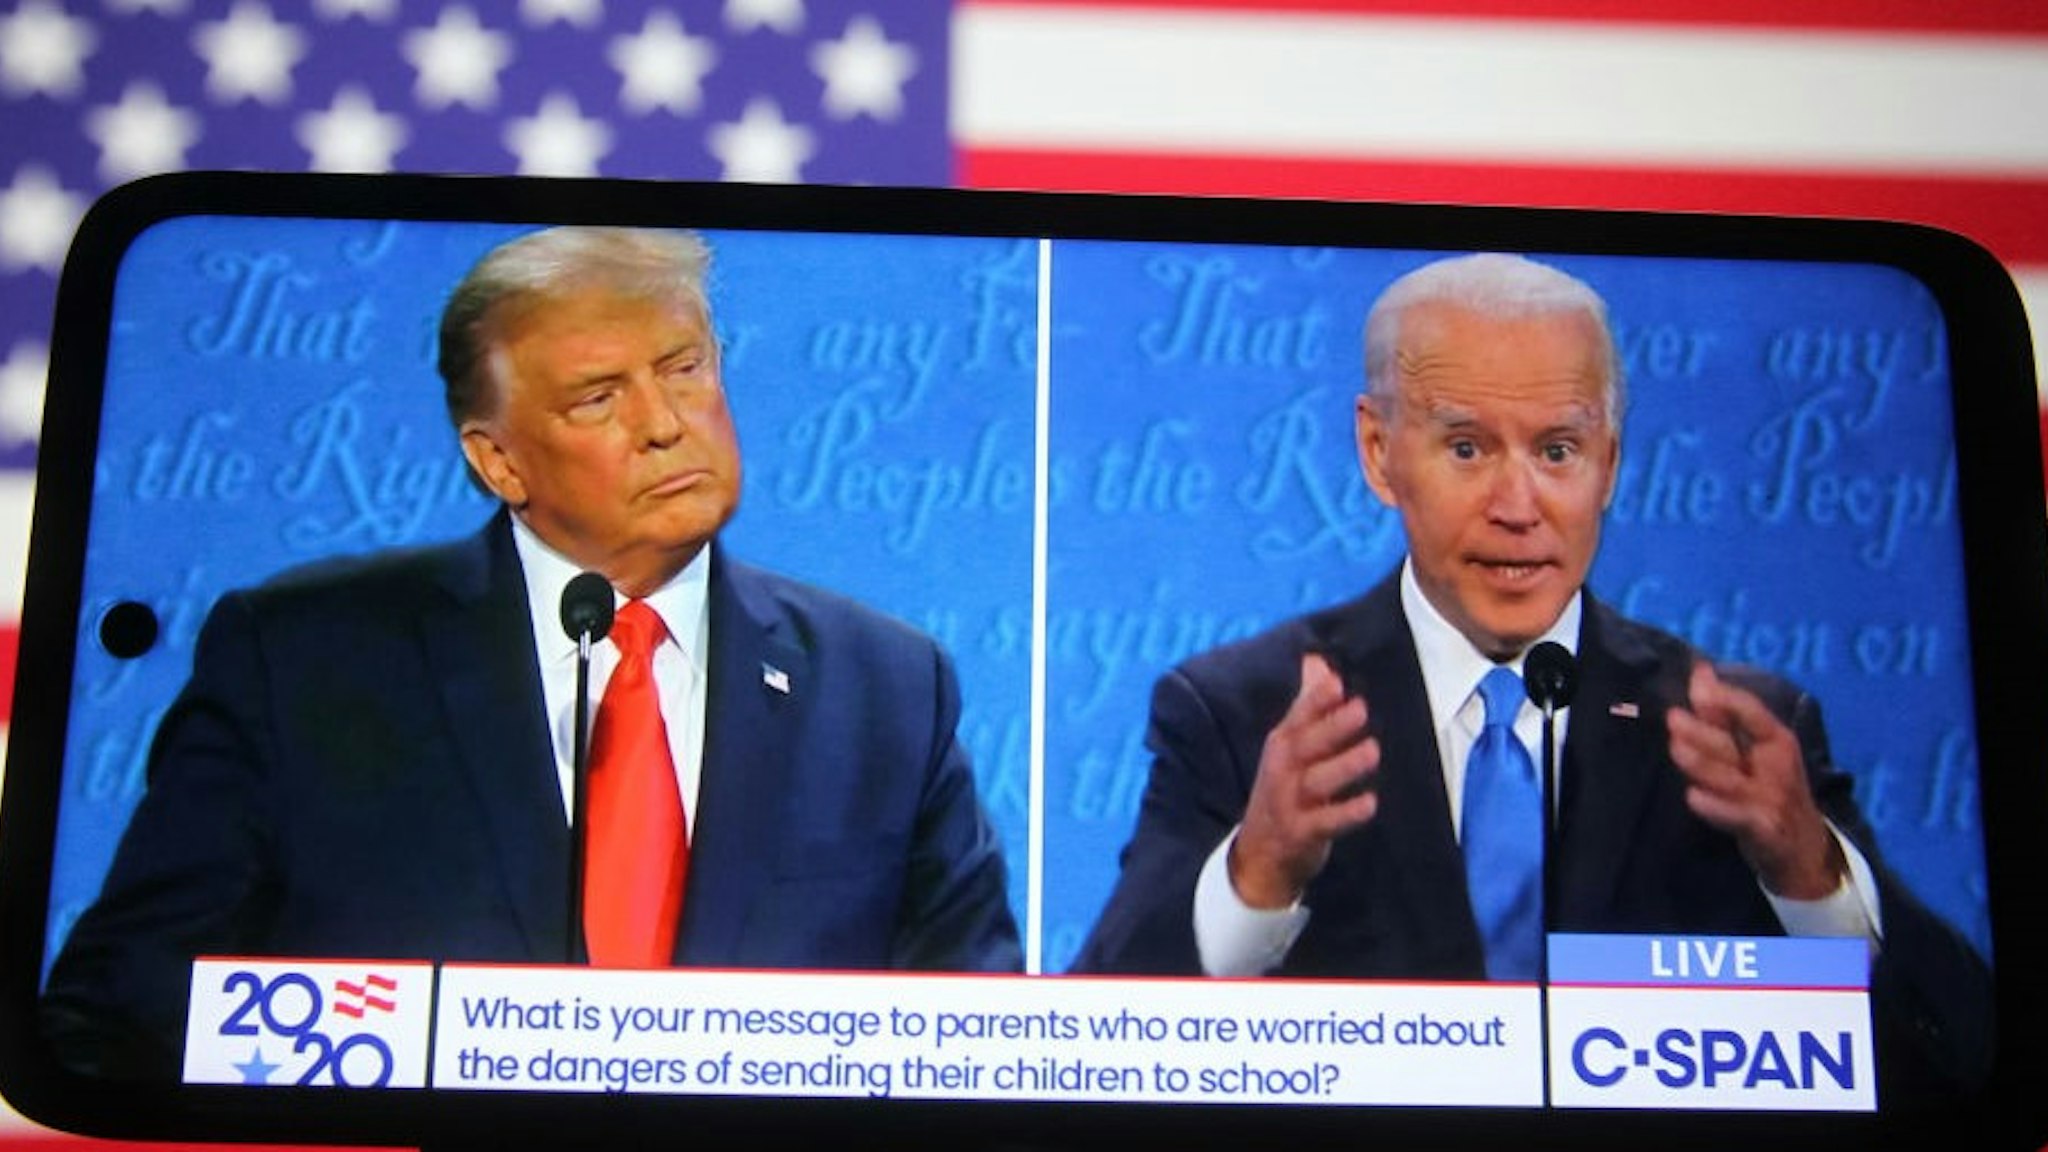 UKRAINE - 2020/10/23: In this photo illustration the US President Donald Trump and Democratic presidential candidate and former US Vice President Joe Biden are seen during the final presidential debate displayed on a screen of a smartphone. The final presidential debate between President Donald Trump and former Vice President Joe Biden took place at Belmont University in Nashville, the U.S. on Thursday, October 22. United States presidential election scheduled for November 3, 2020. (Photo Illustration by